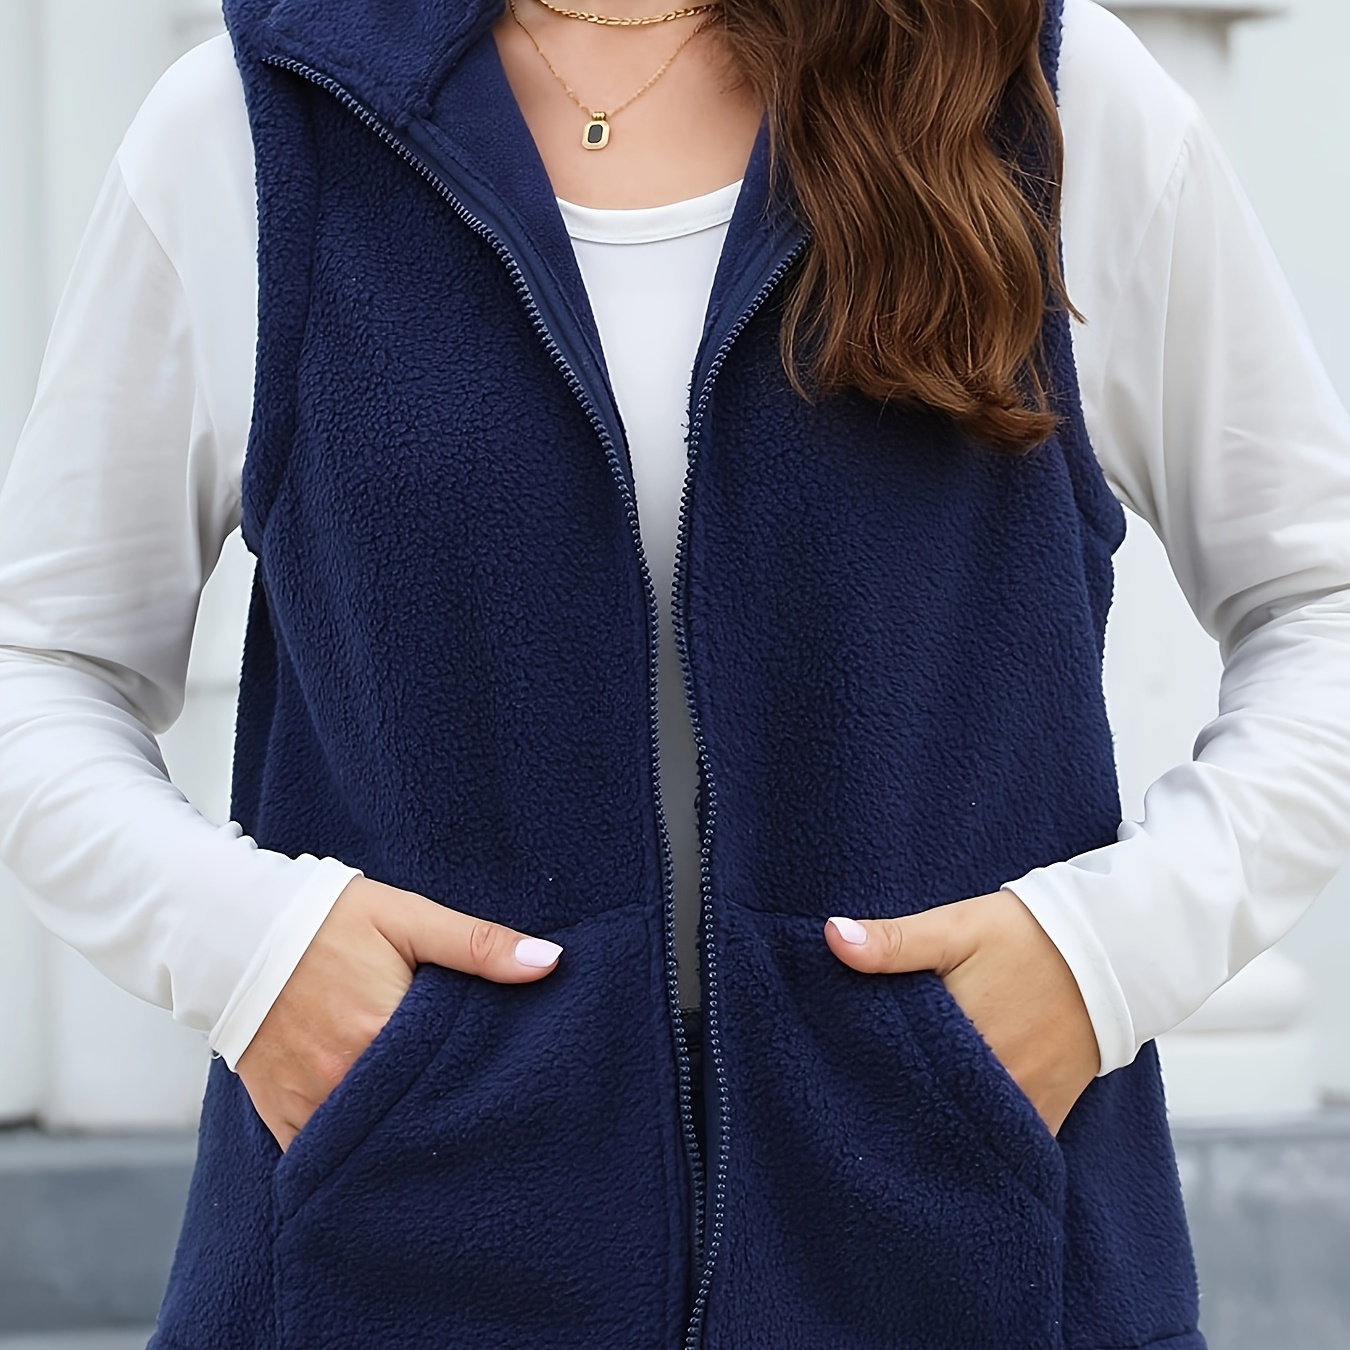 Label Fleece Warm Vest Jacket For Fall Winter Outdoor Sports, Solid Color Casual Sports Warm Sleeveless Jacket, Women's Clothing